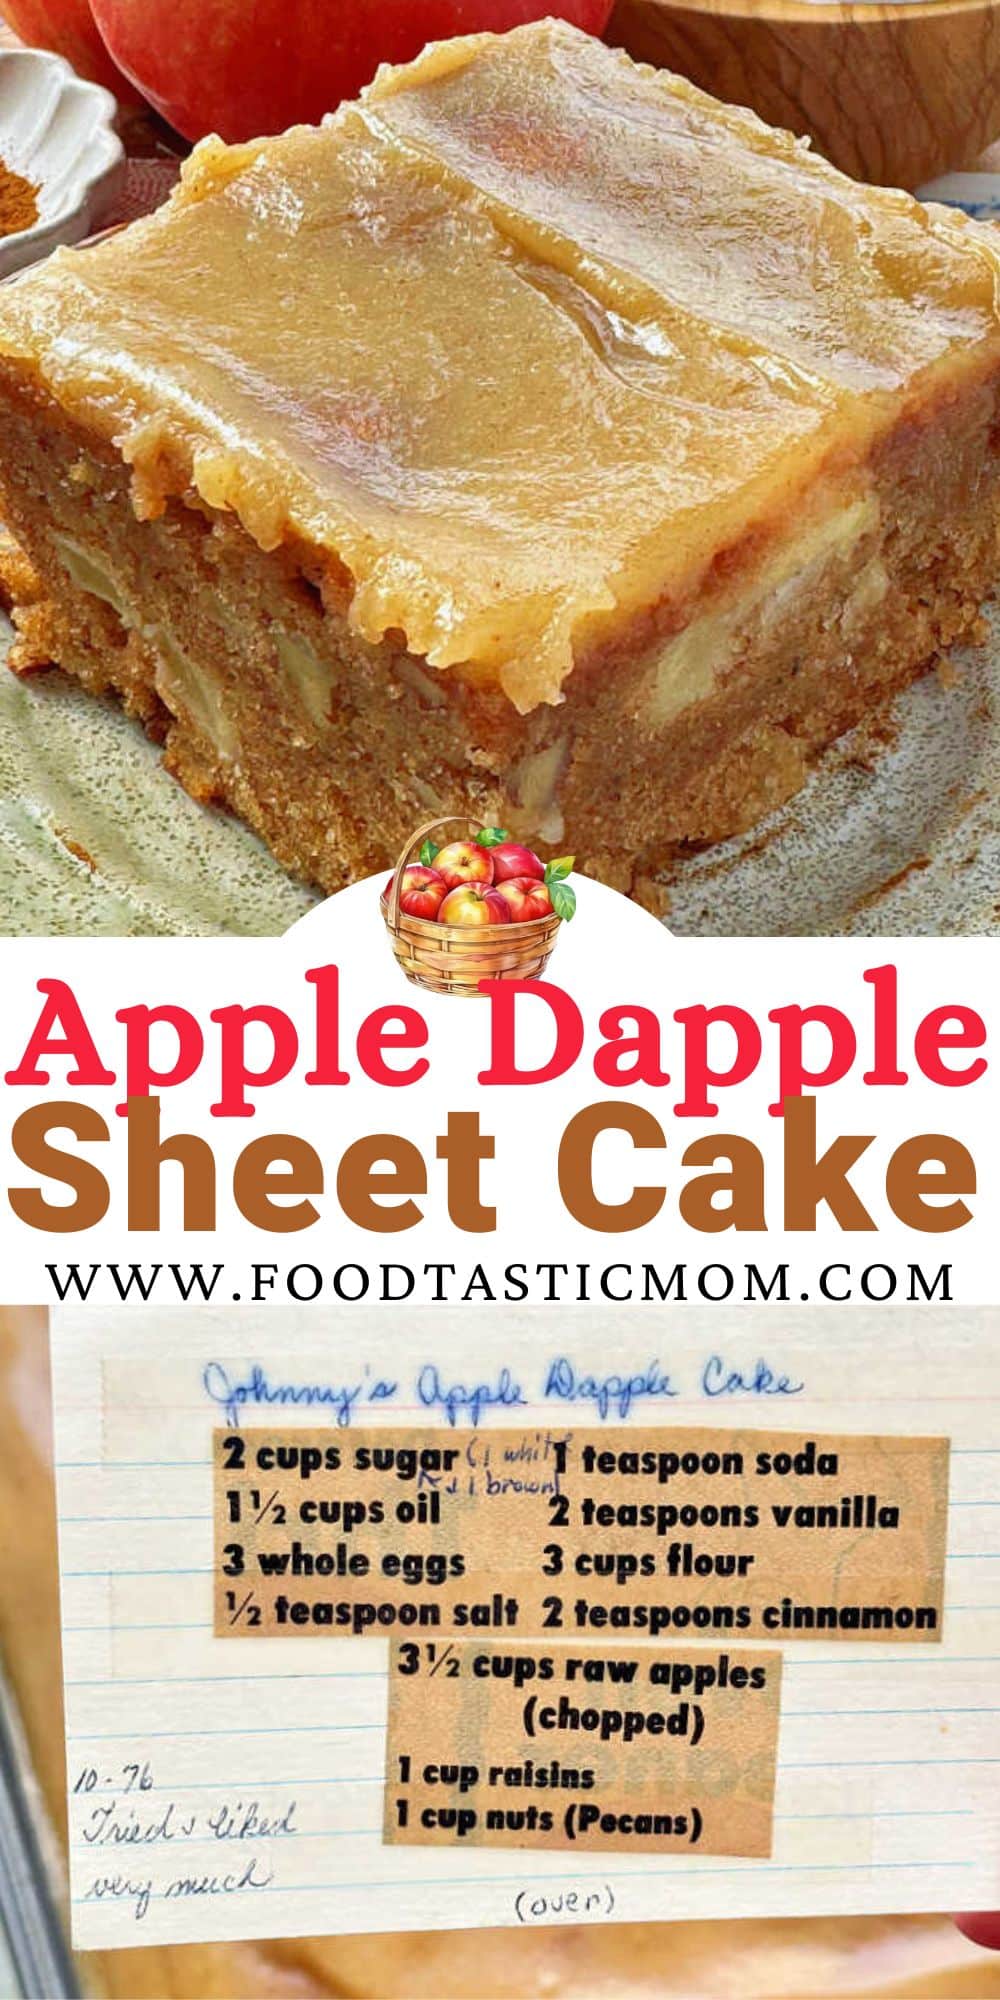 This easy apple dapple cake recipe is one of my most favorite vintage recipes from my Mom's handwritten recipe card collection. It's a classic cake filled with fresh apples and warm fall spices. via @foodtasticmom